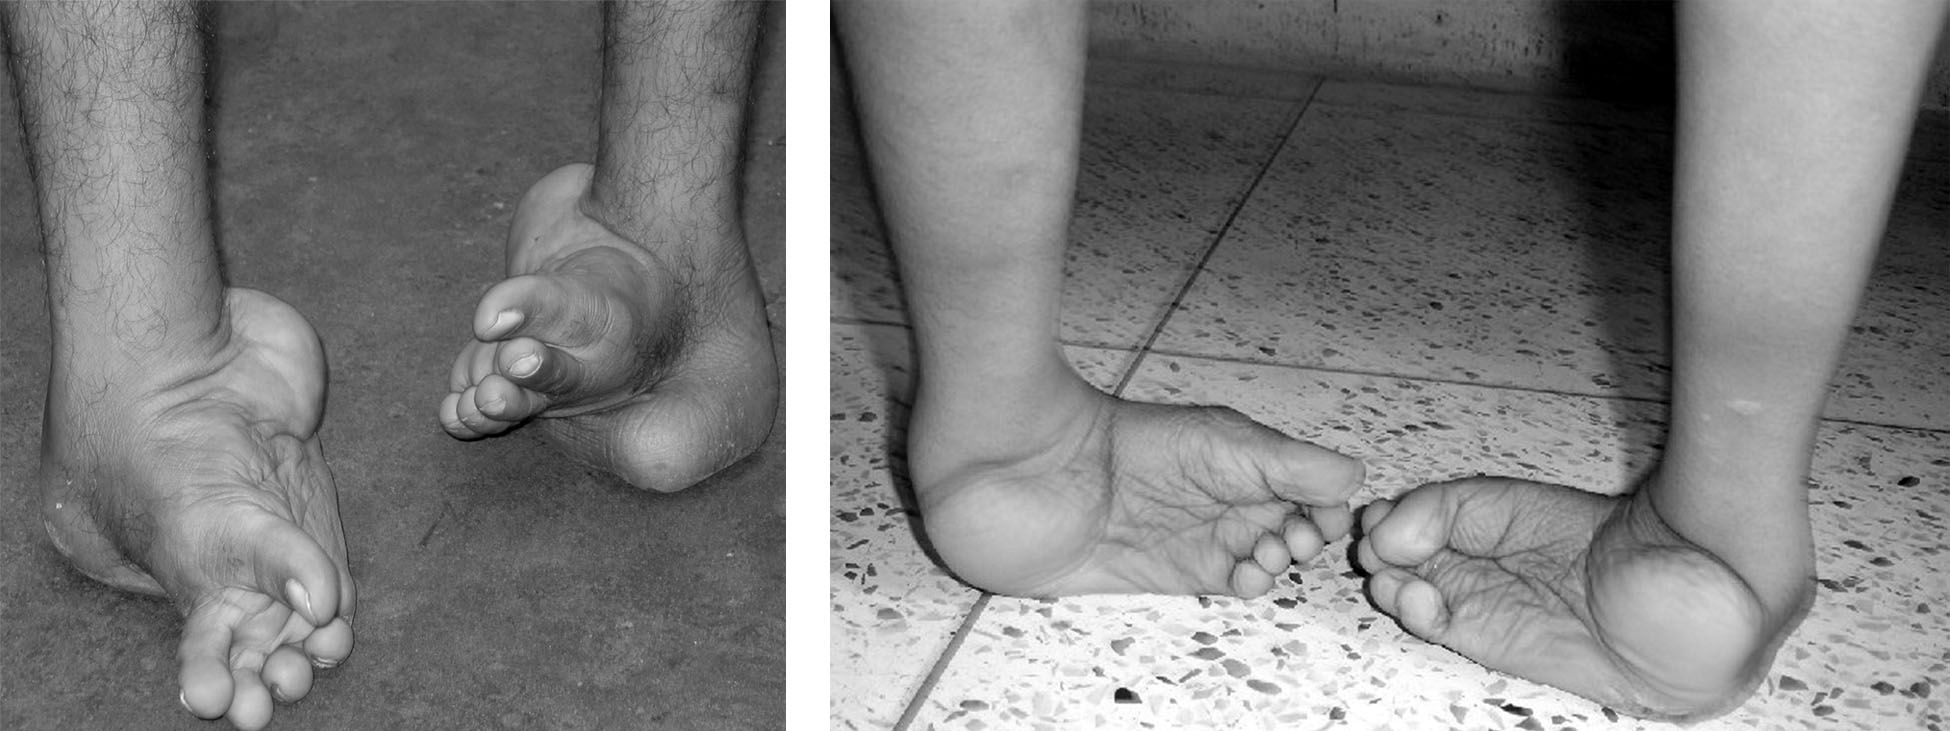 Untreated clubfoot that has result in serious disability